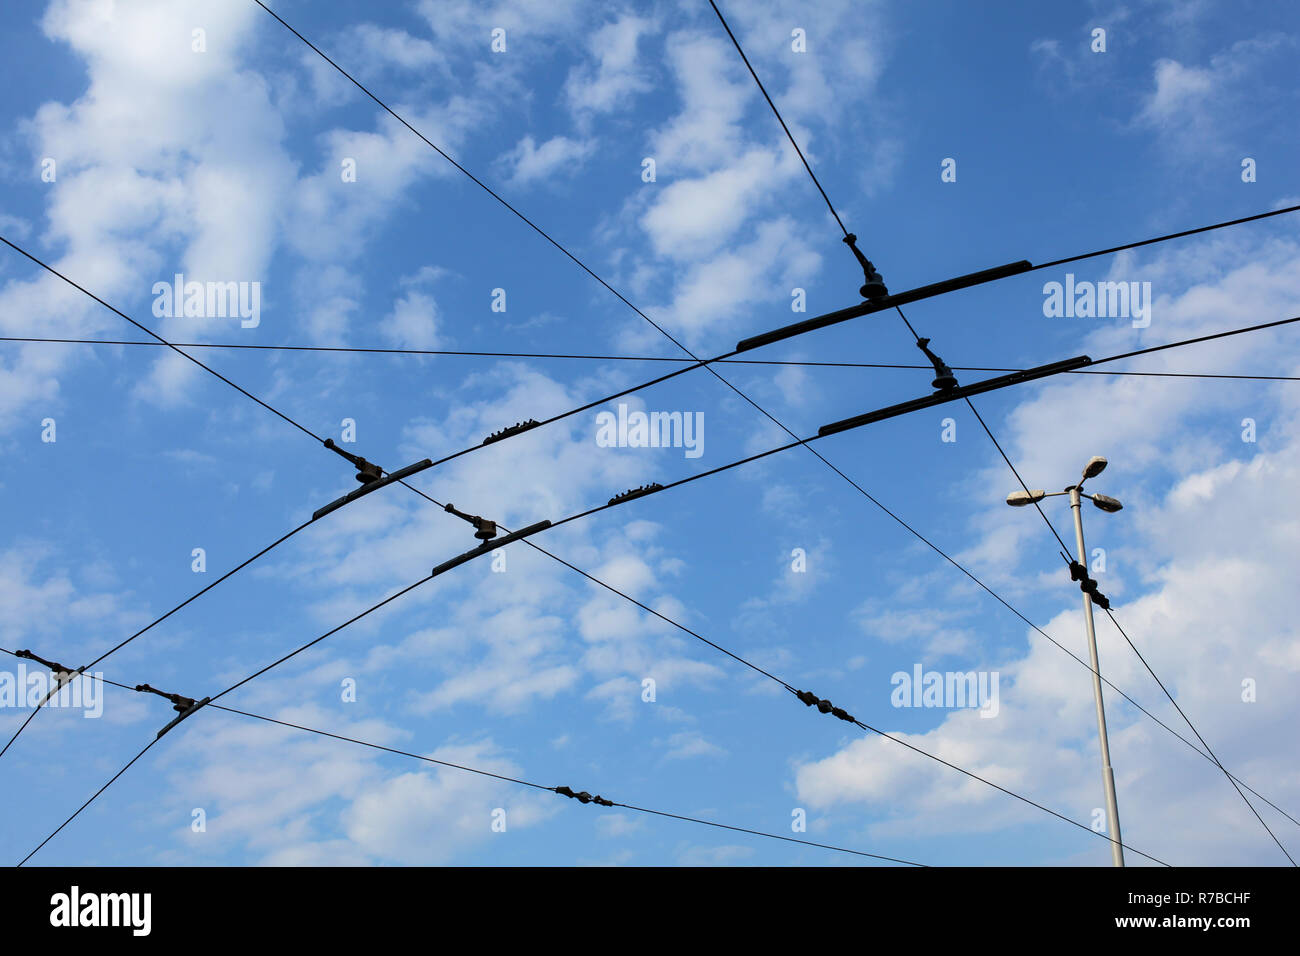 Streetcar / tram trolley overhead electric lines against blue sky. Stock Photo